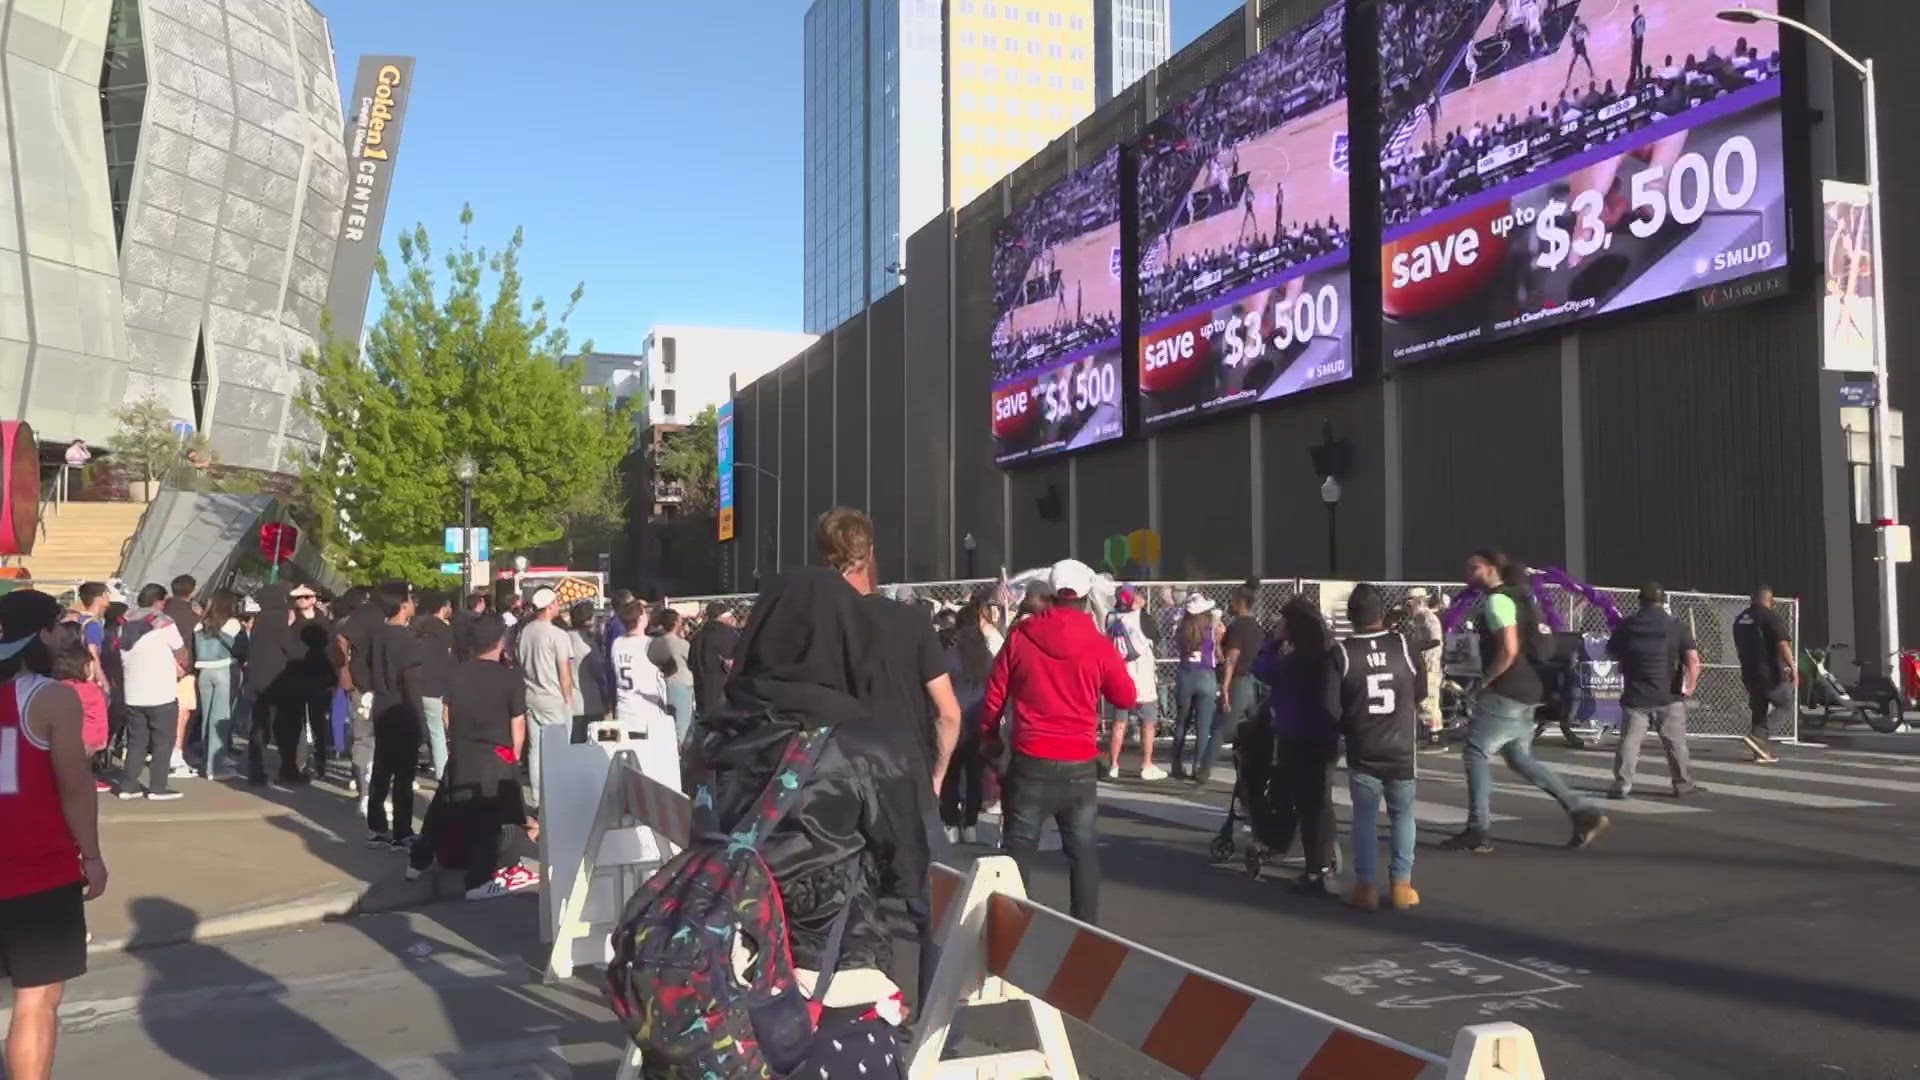 Tens of thousands of fans flocked to the city Saturday night for Game 1 where the Sacramento Kings defeated the Golden State Warriors.